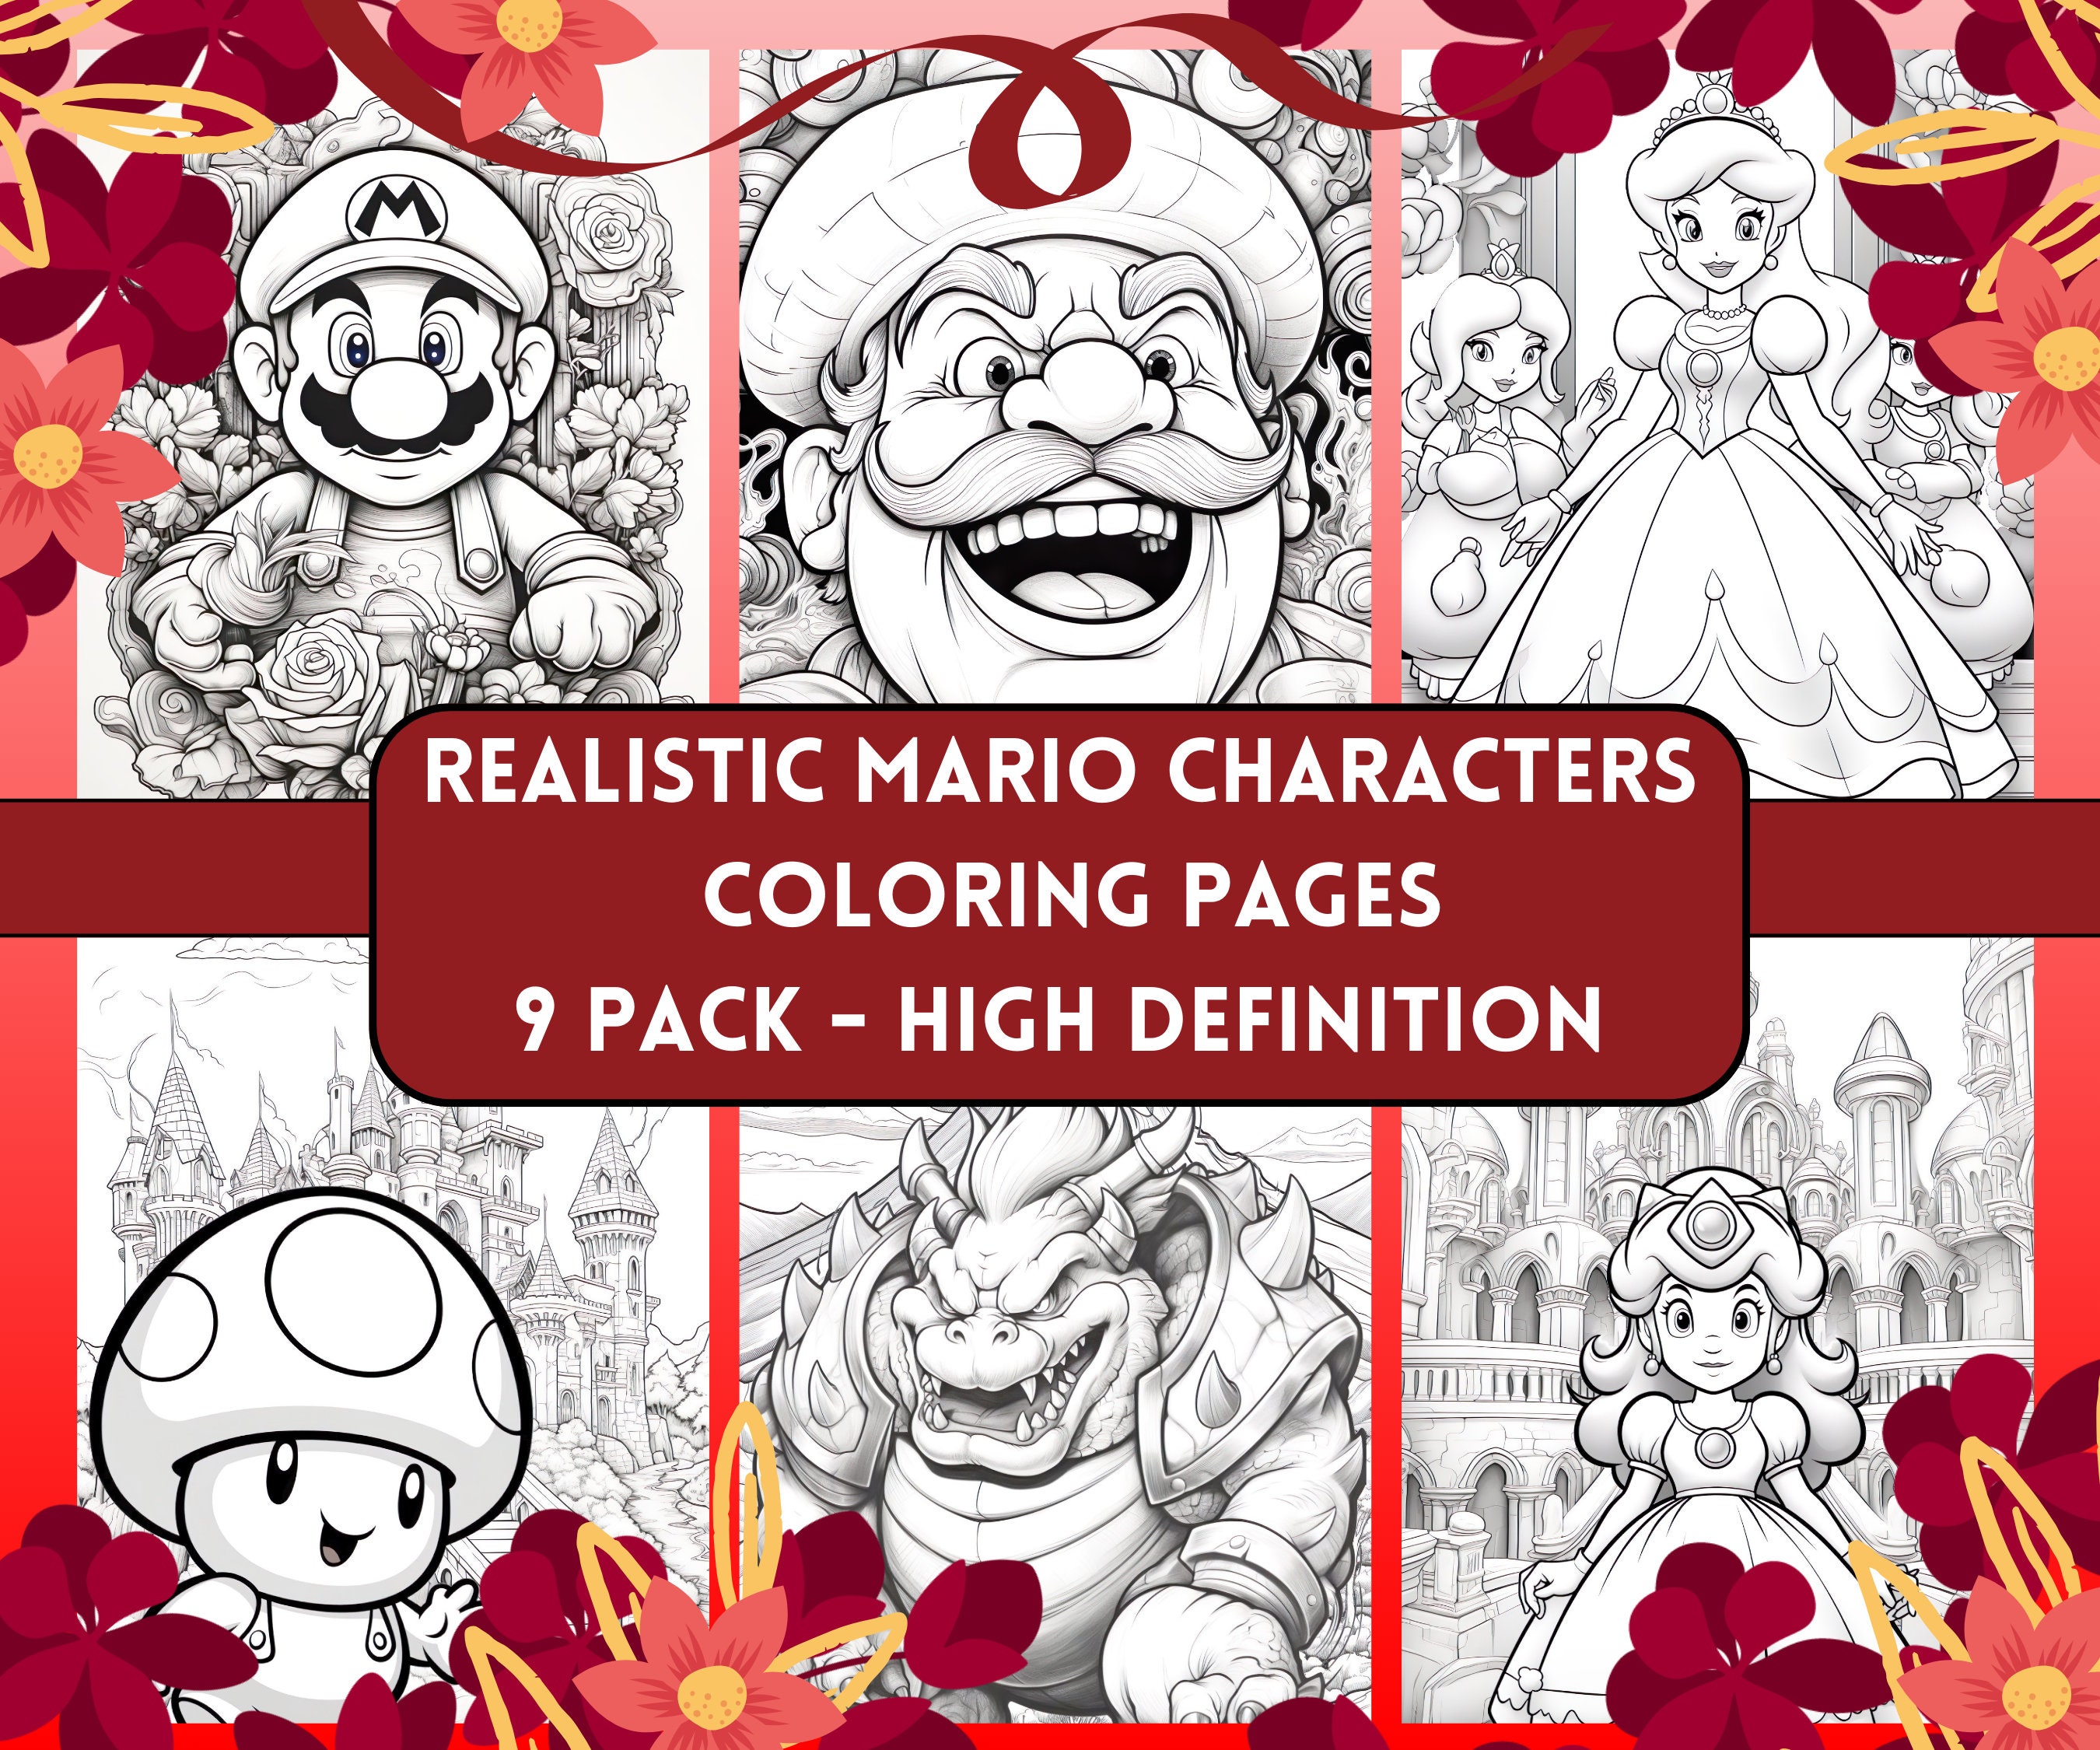 Realistic super mario characters coloring pages mario and friends super mario digital coloring book fun at home activity relax and color instant download